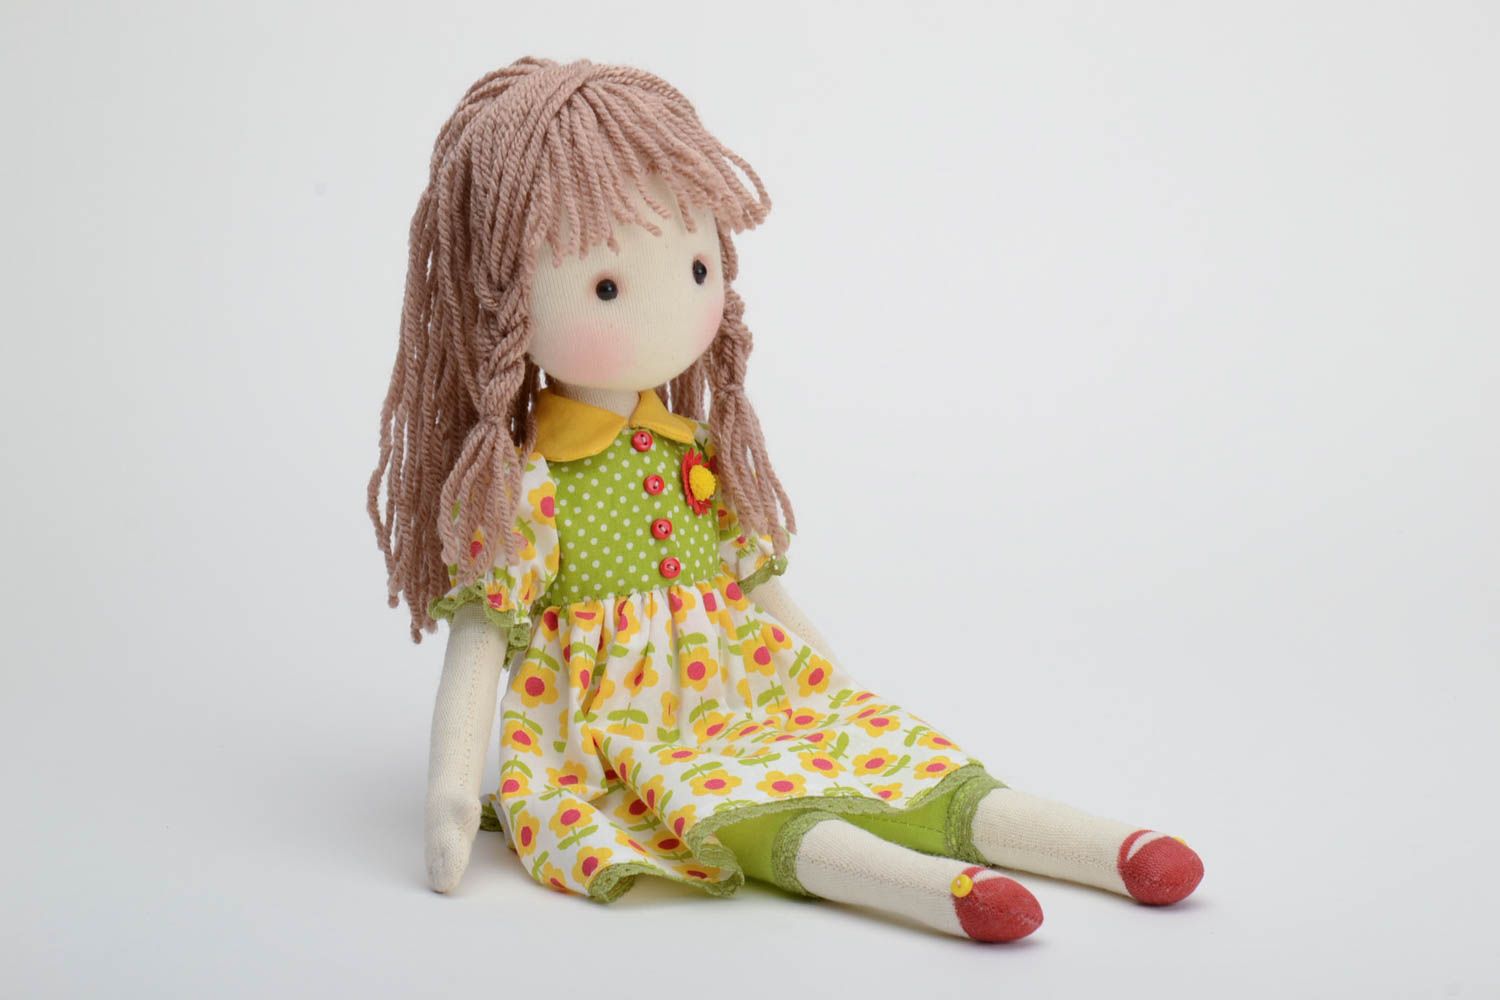 Handmade designer soft doll sewn of cotton fabric girl in floral dress photo 2